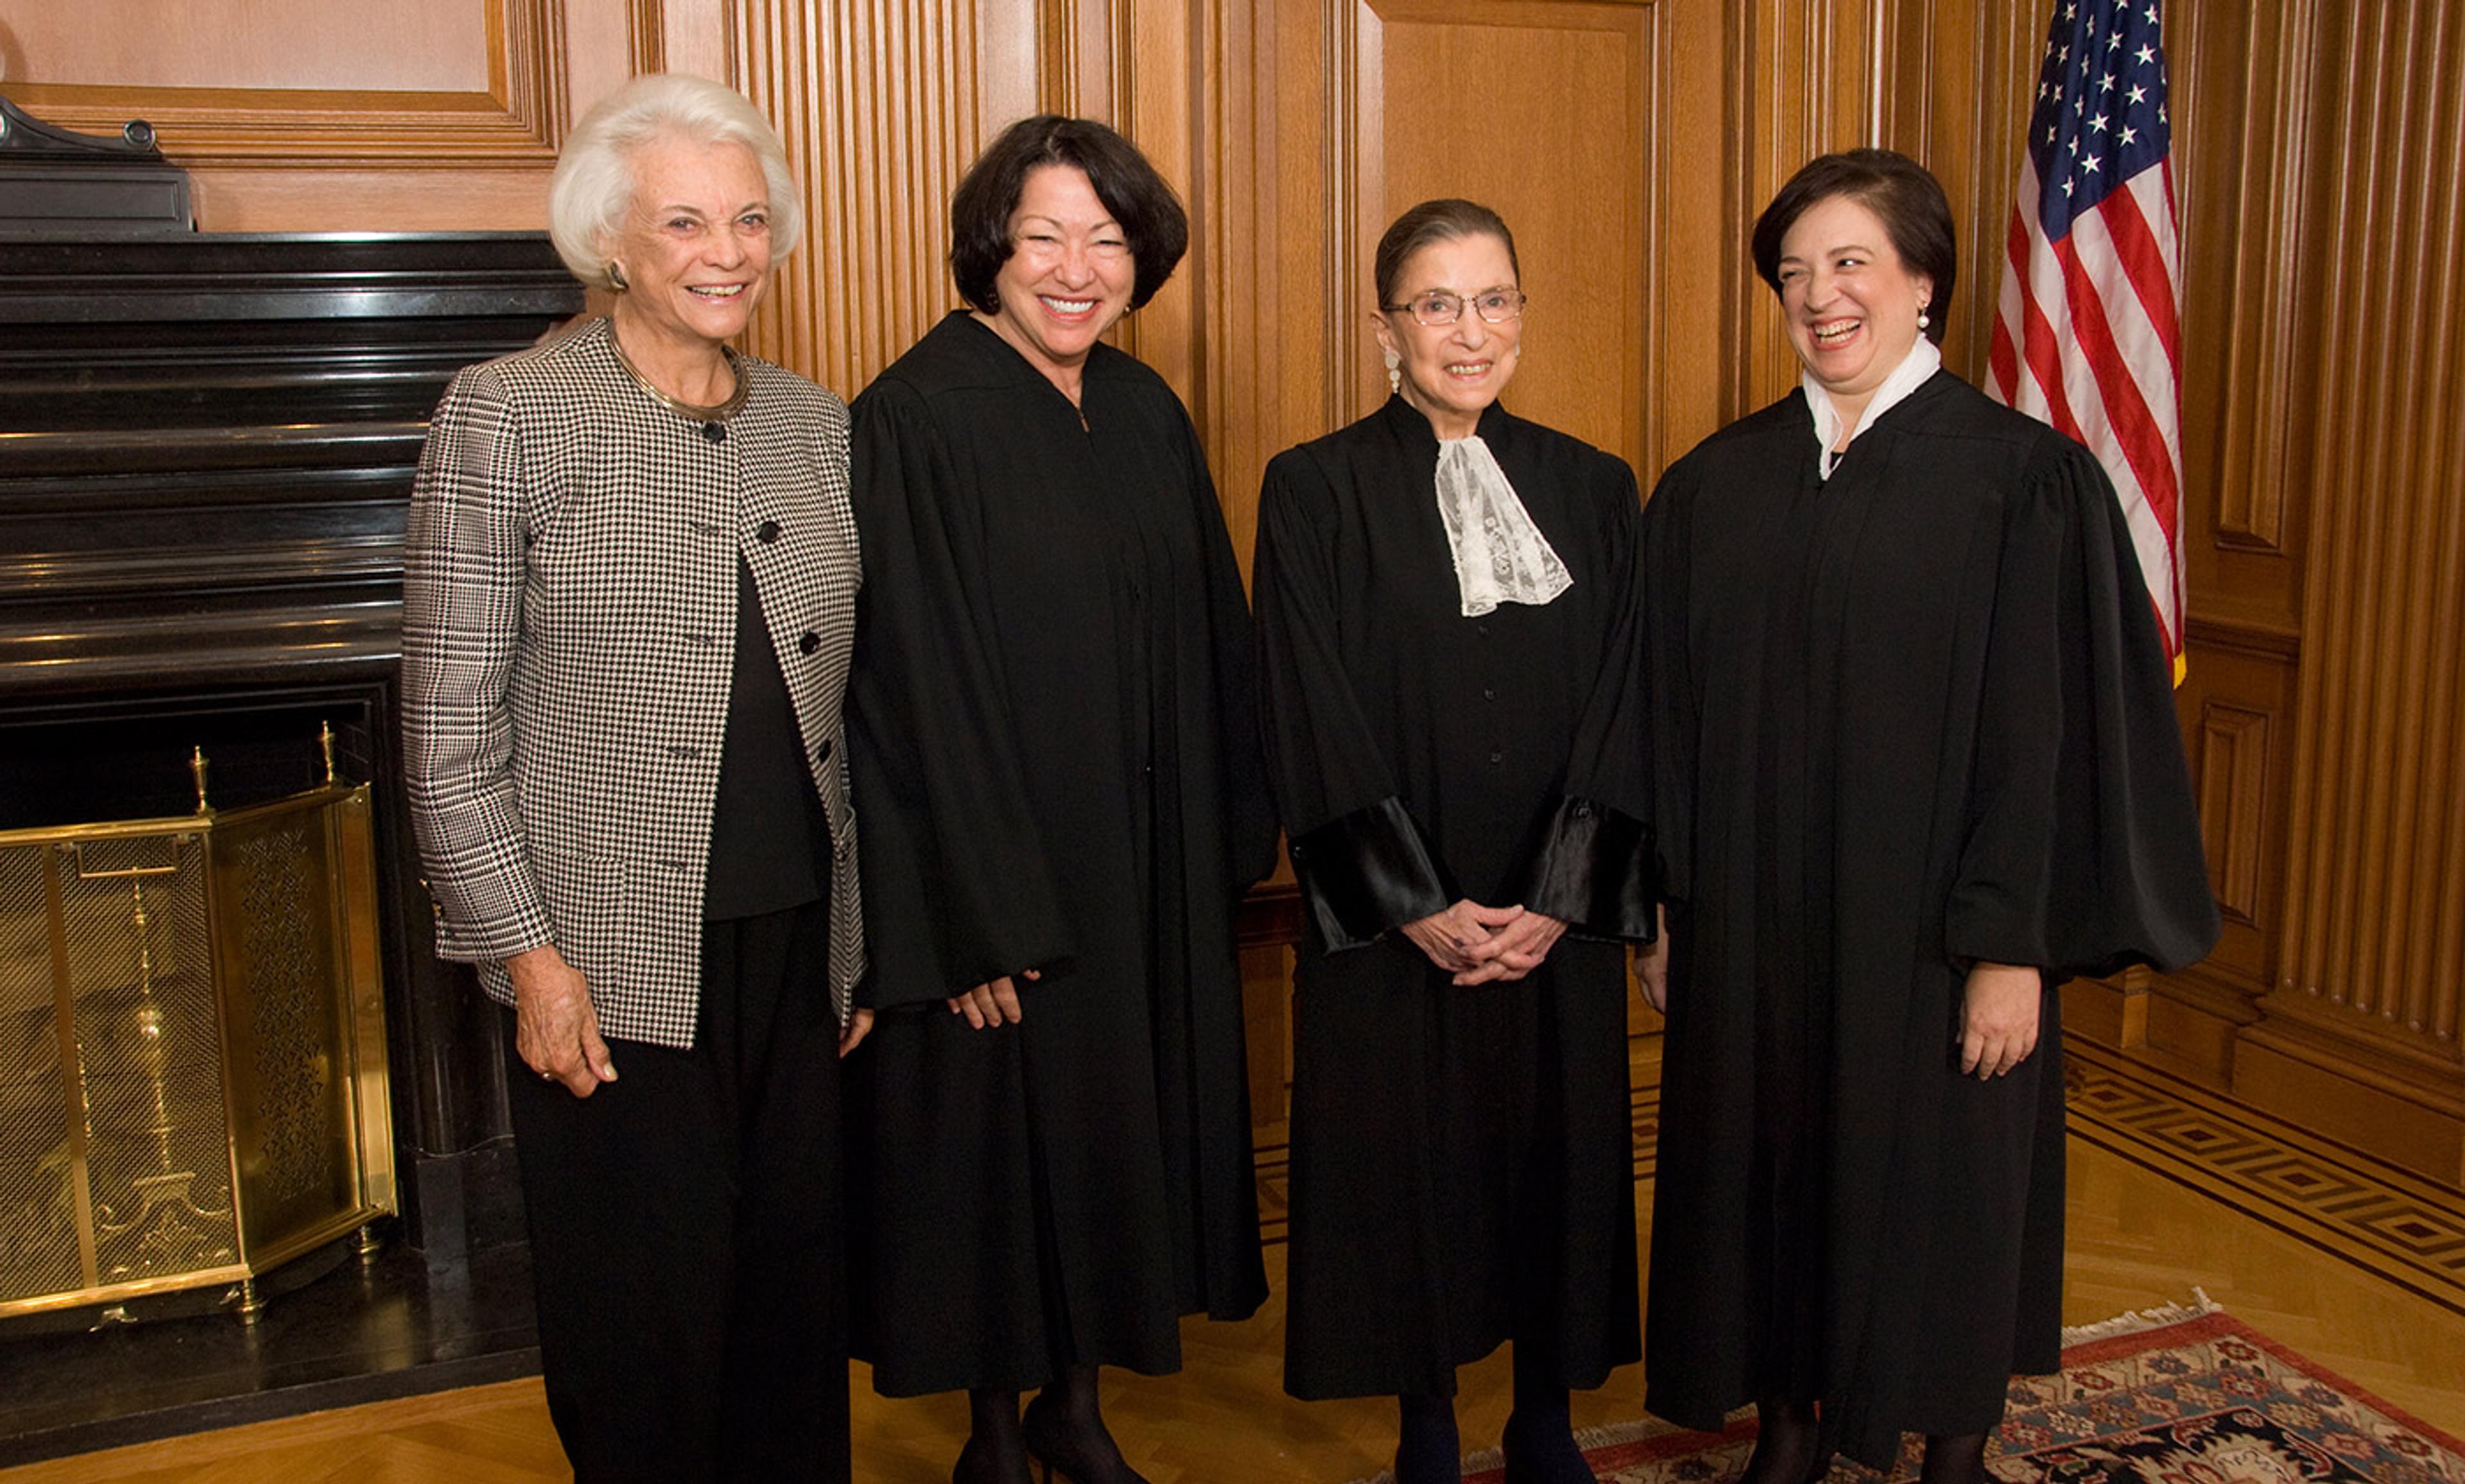 <p>From left to right: Justice Sandra Day O’Connor (Ret.), Justice Sonia Sotomayor, Justice Ruth Bader Ginsburg, and Justice Elena Kagan in 2010. <em>Wikimedia</em></p>